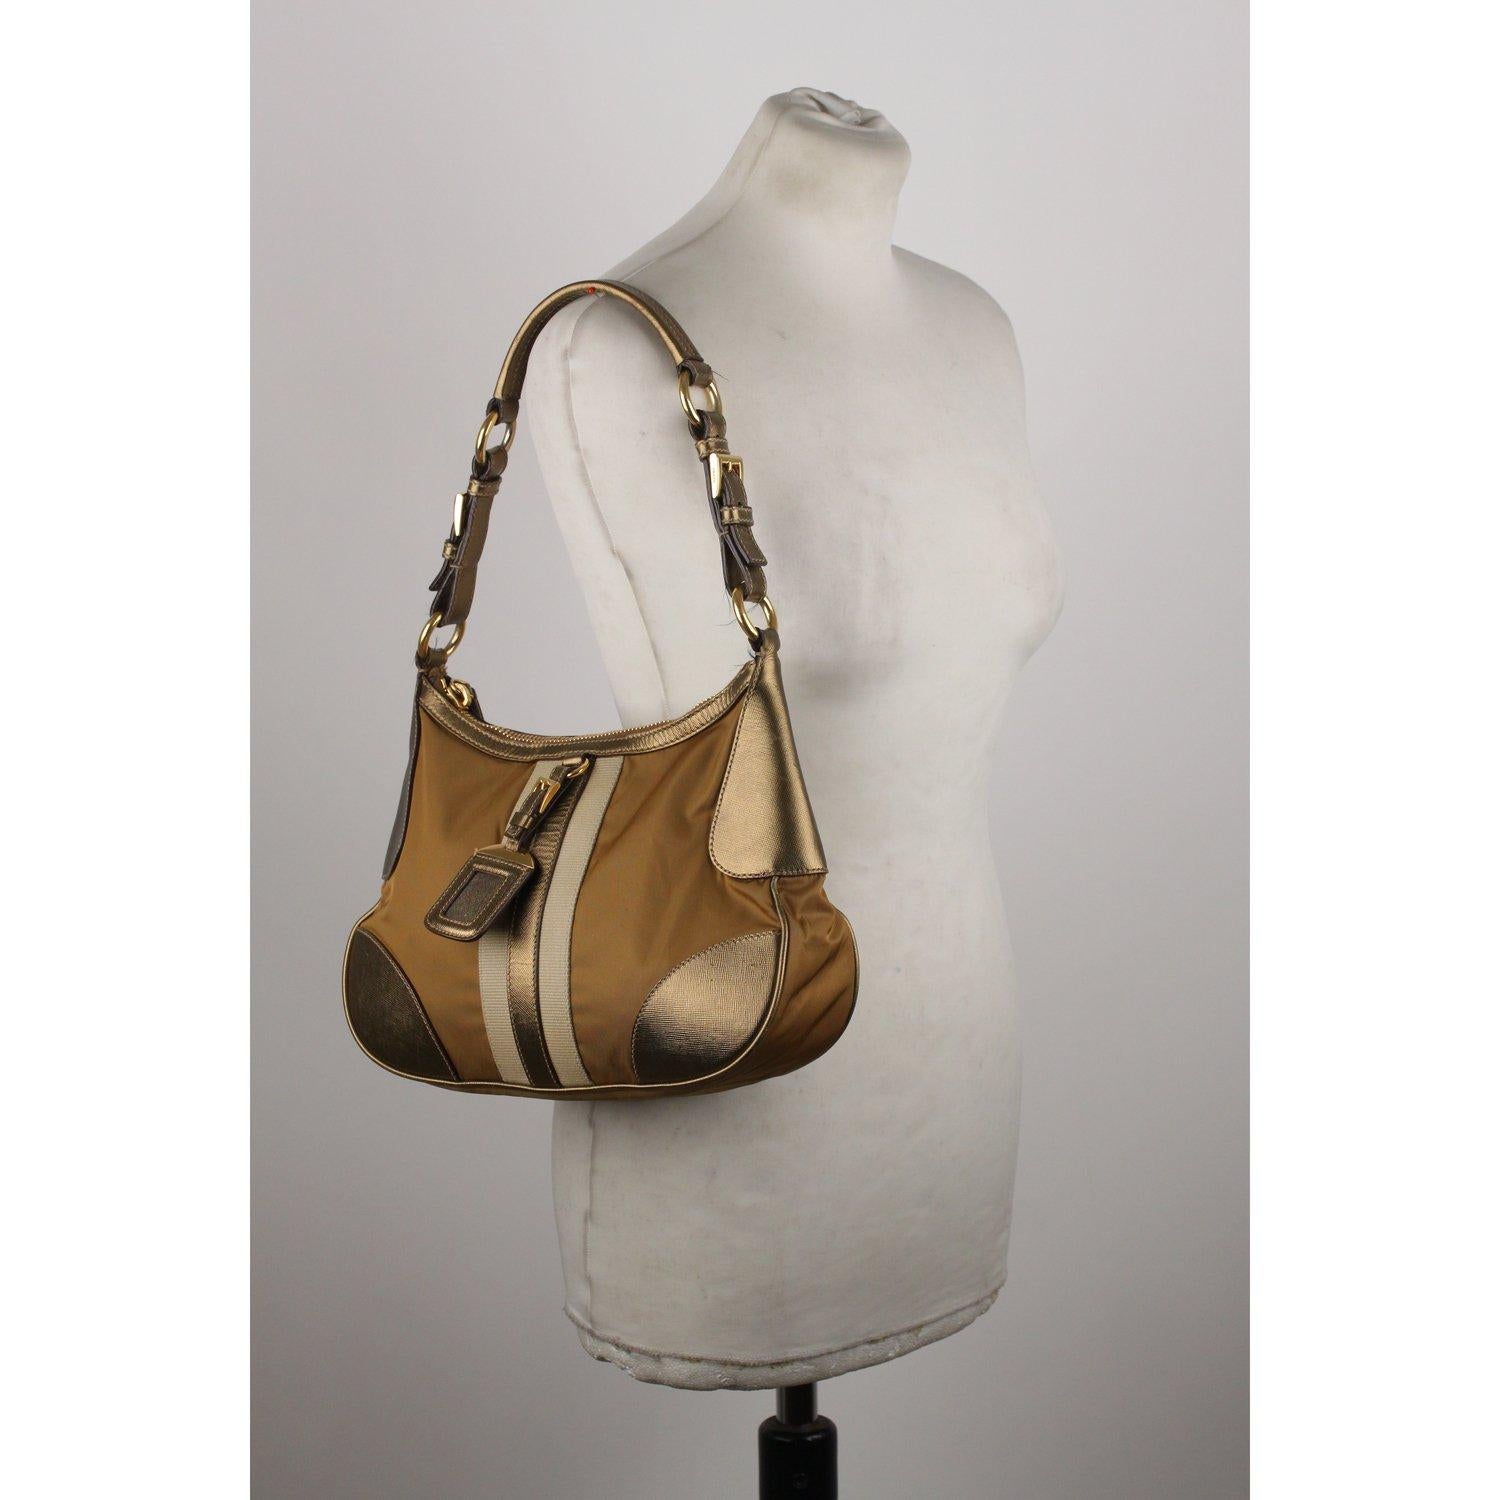 MATERIAL: Nylon COLOR: Gold MODEL: Hobo GENDER: Women SIZE: Medium Condition CONDITION DETAILS: B :GOOD CONDITION - Some light wear of use - Some wear of use on corners and on leather trim, some spots on canvas on the front Measurements